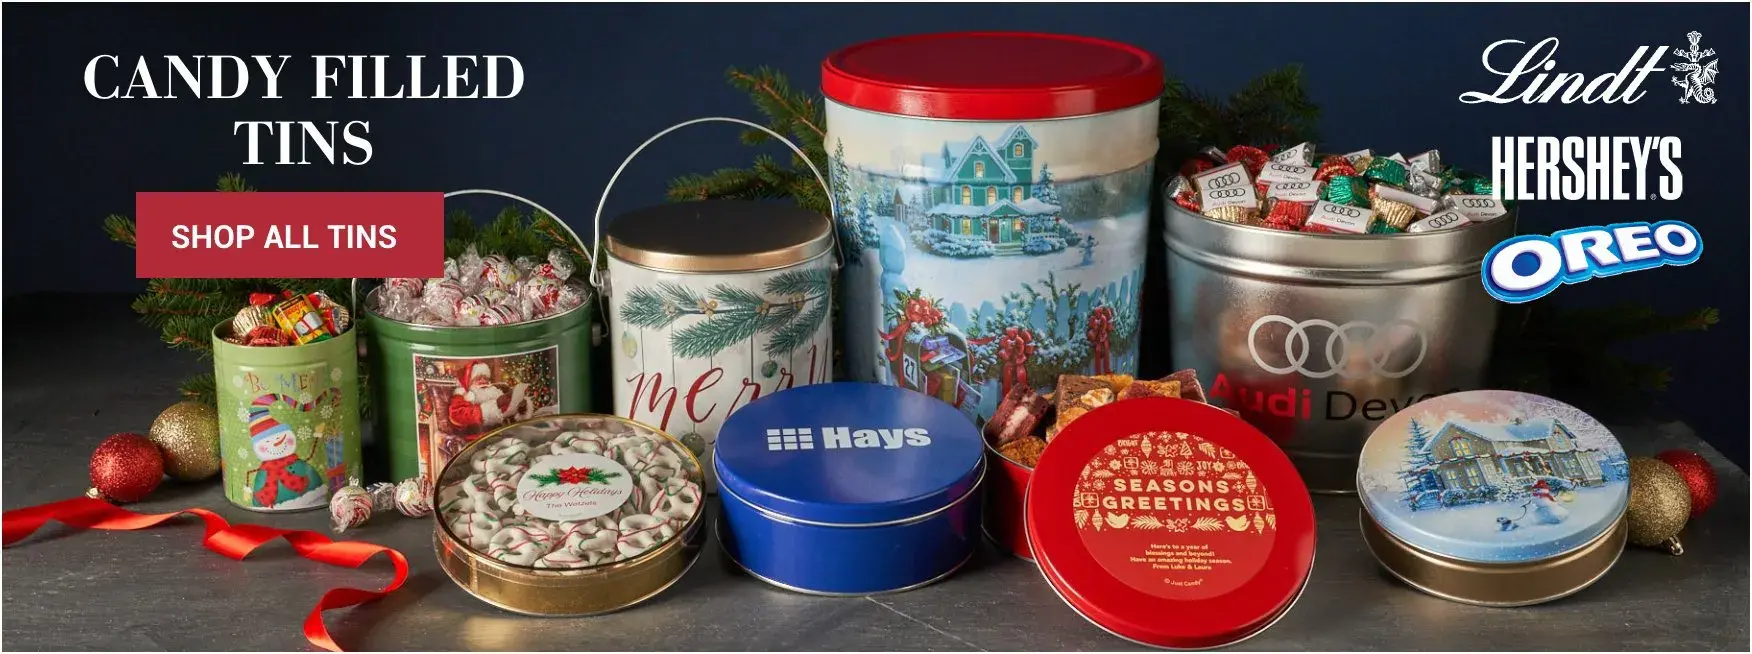 Personalized Christmas Candy Filled Tins